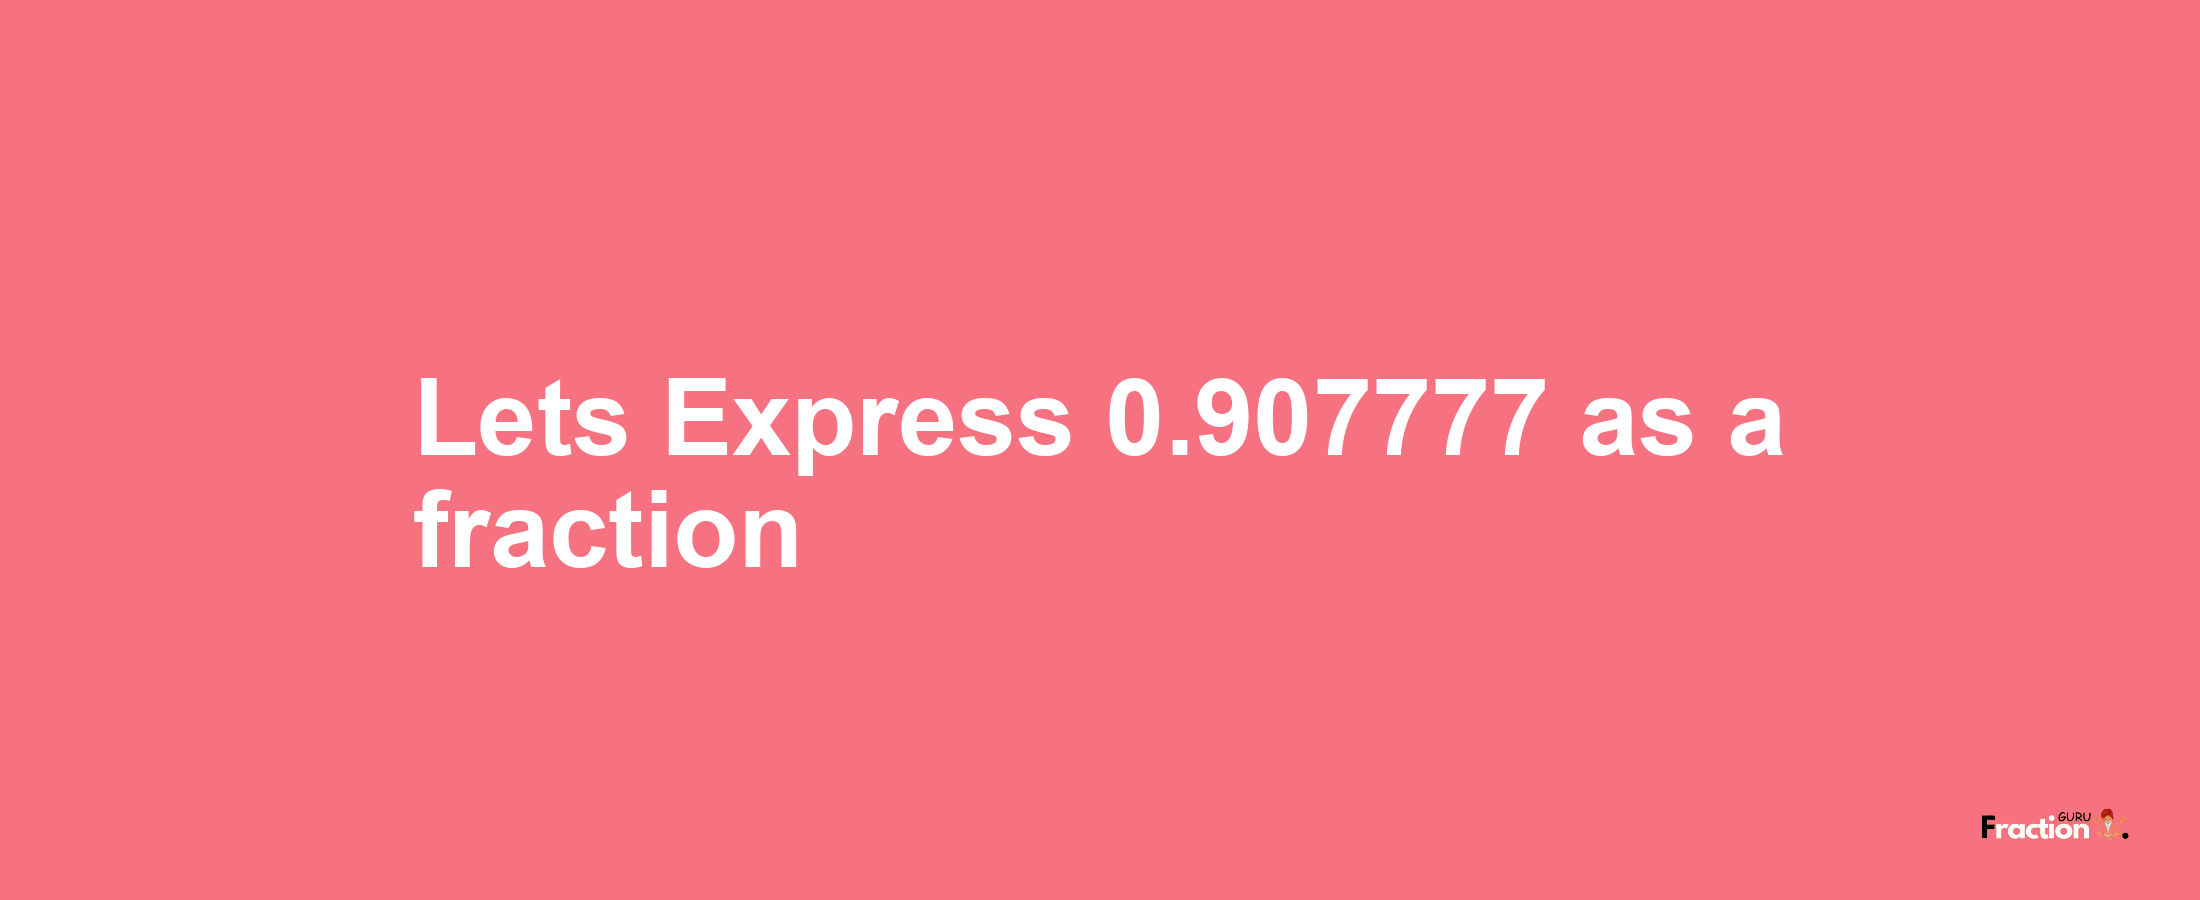 Lets Express 0.907777 as afraction